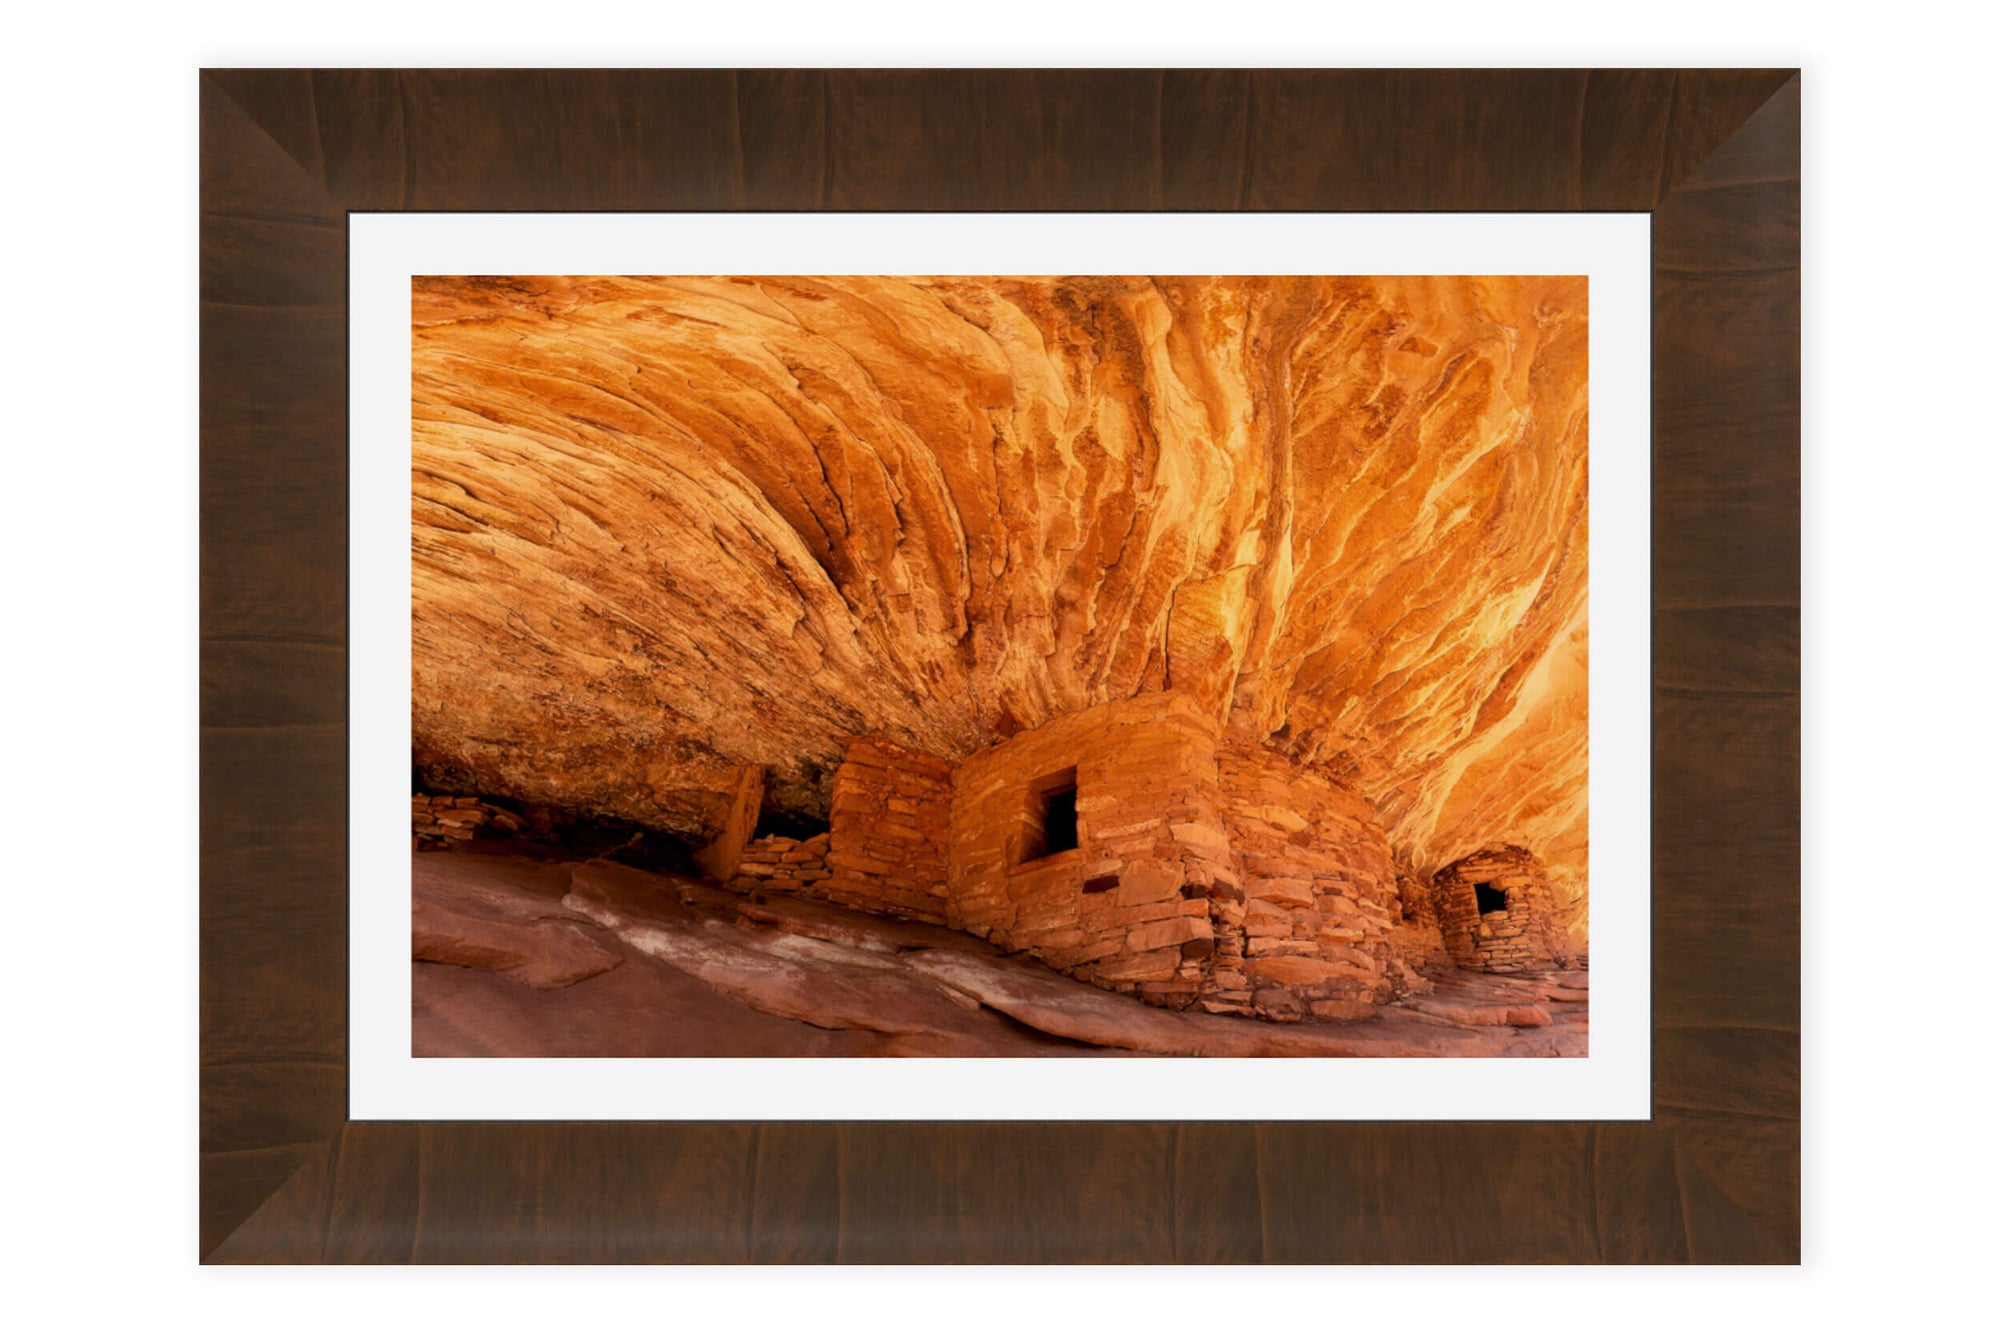 A framed picture of the House on Fire Anasazi dwelling in Bears Ears Monument.